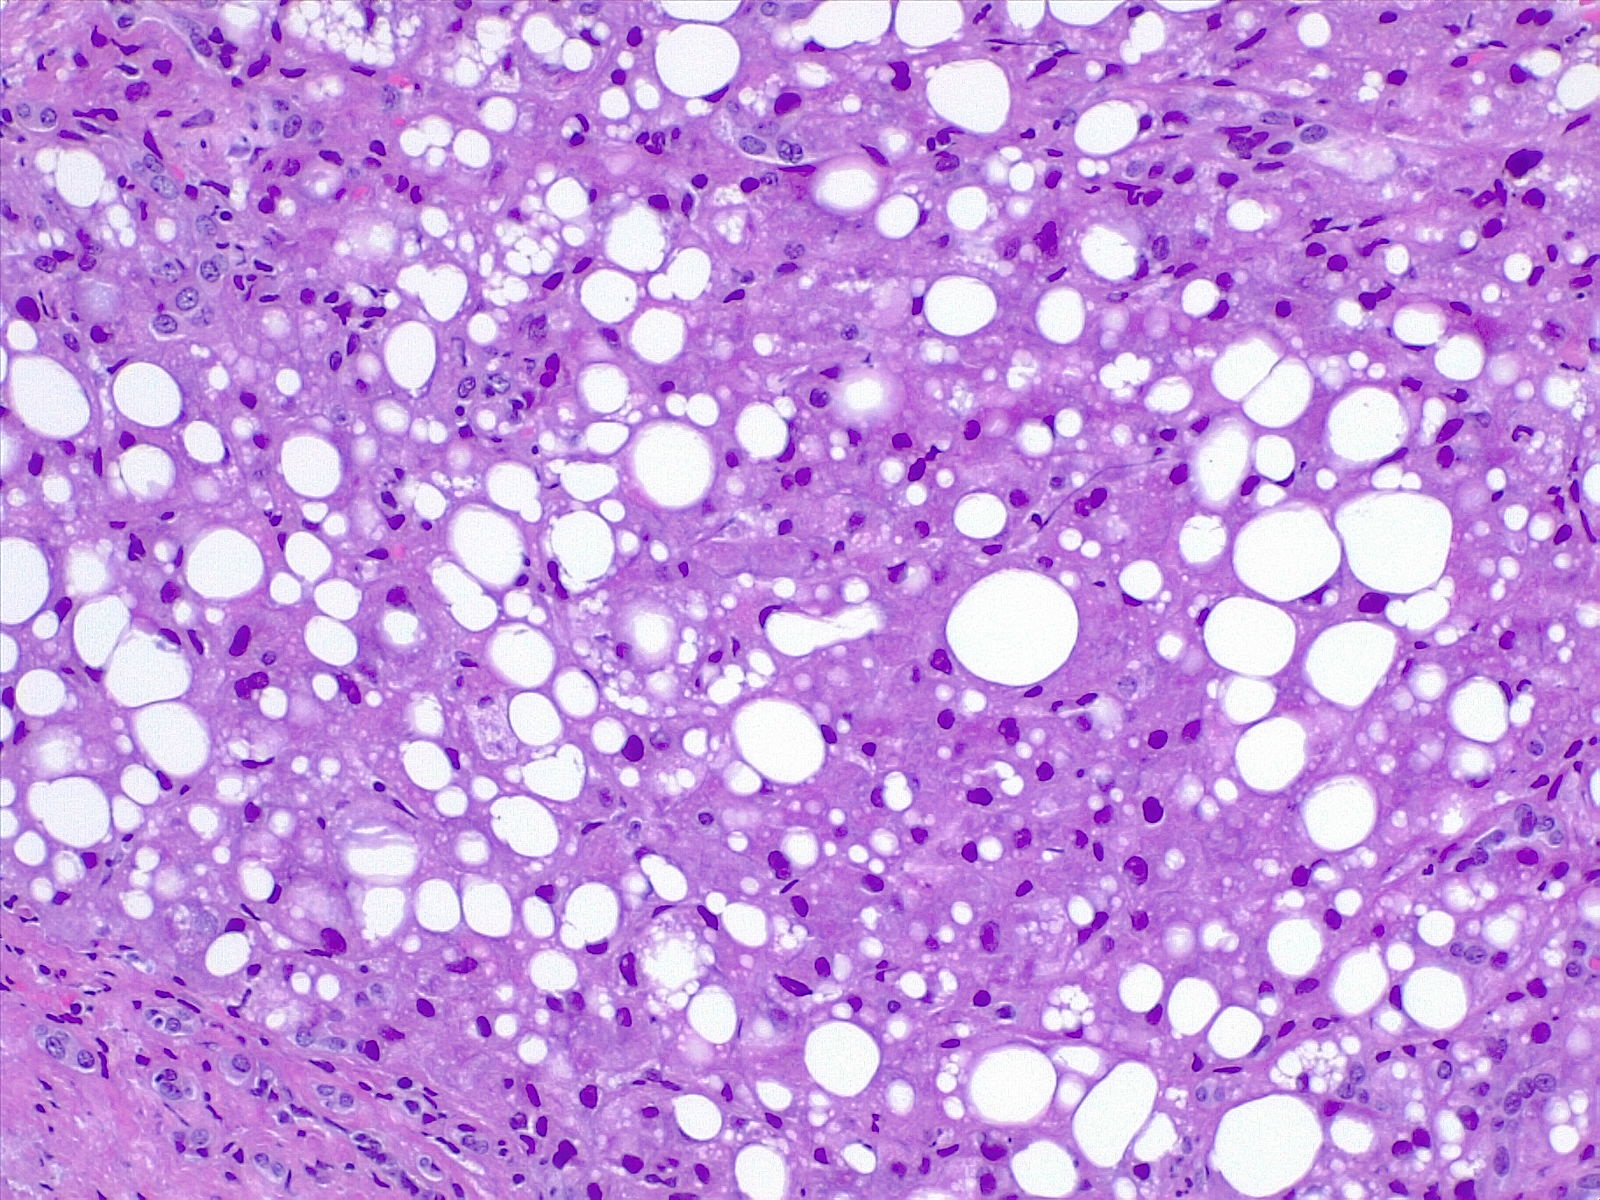 Fatty liver disease. Steatosis seen histologically as lipidic droplets (microvescicular) or a large intracytoplasmic vacuole (macrovescicular). Steatosis is quantified as percentage of altered hepatocytes in all fields.